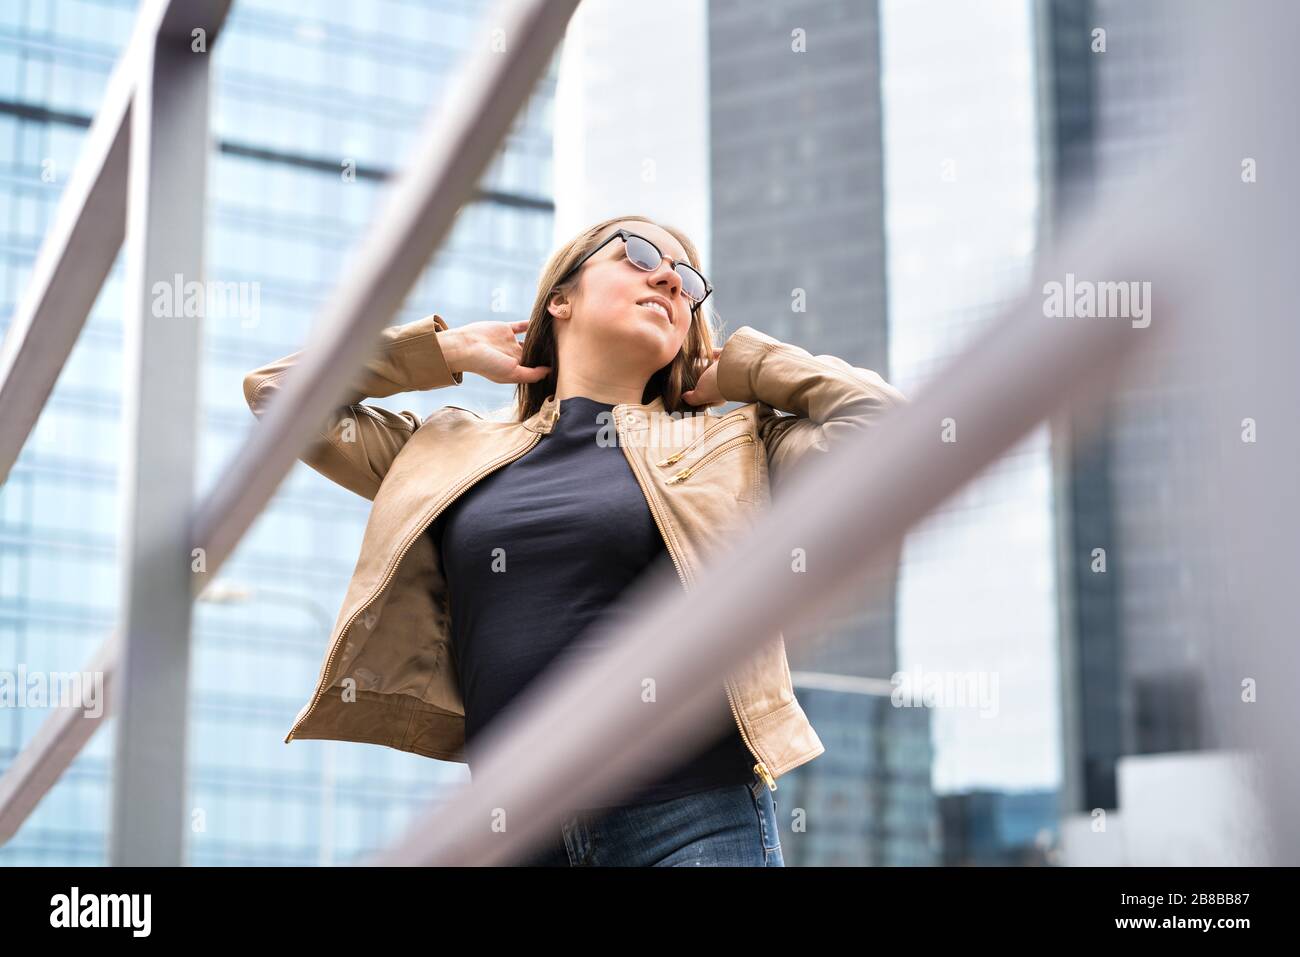 Independent, confident and powerful woman in city. Happy healthy model with sunglasses and good fashion style. Stock Photo